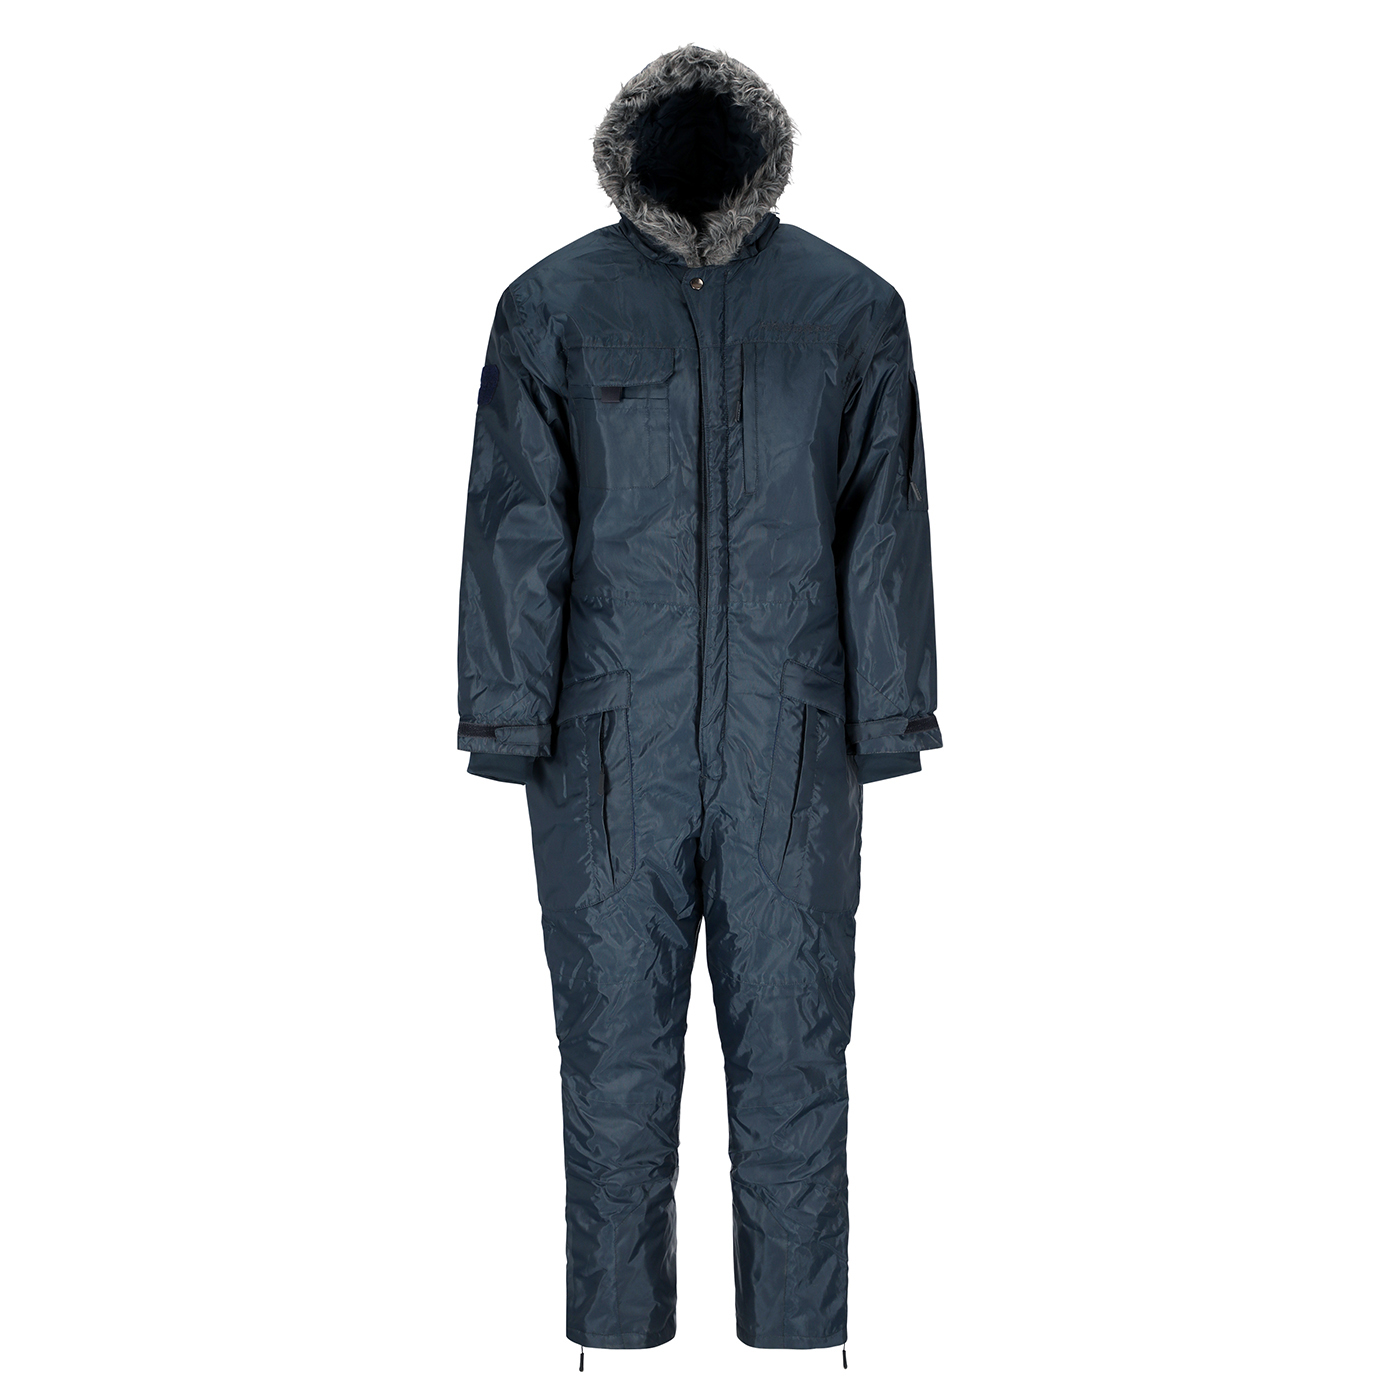 Navy Blue IDF Snowsuit Winter Clothing Snow Ski Suit Coverall Insulated Suit